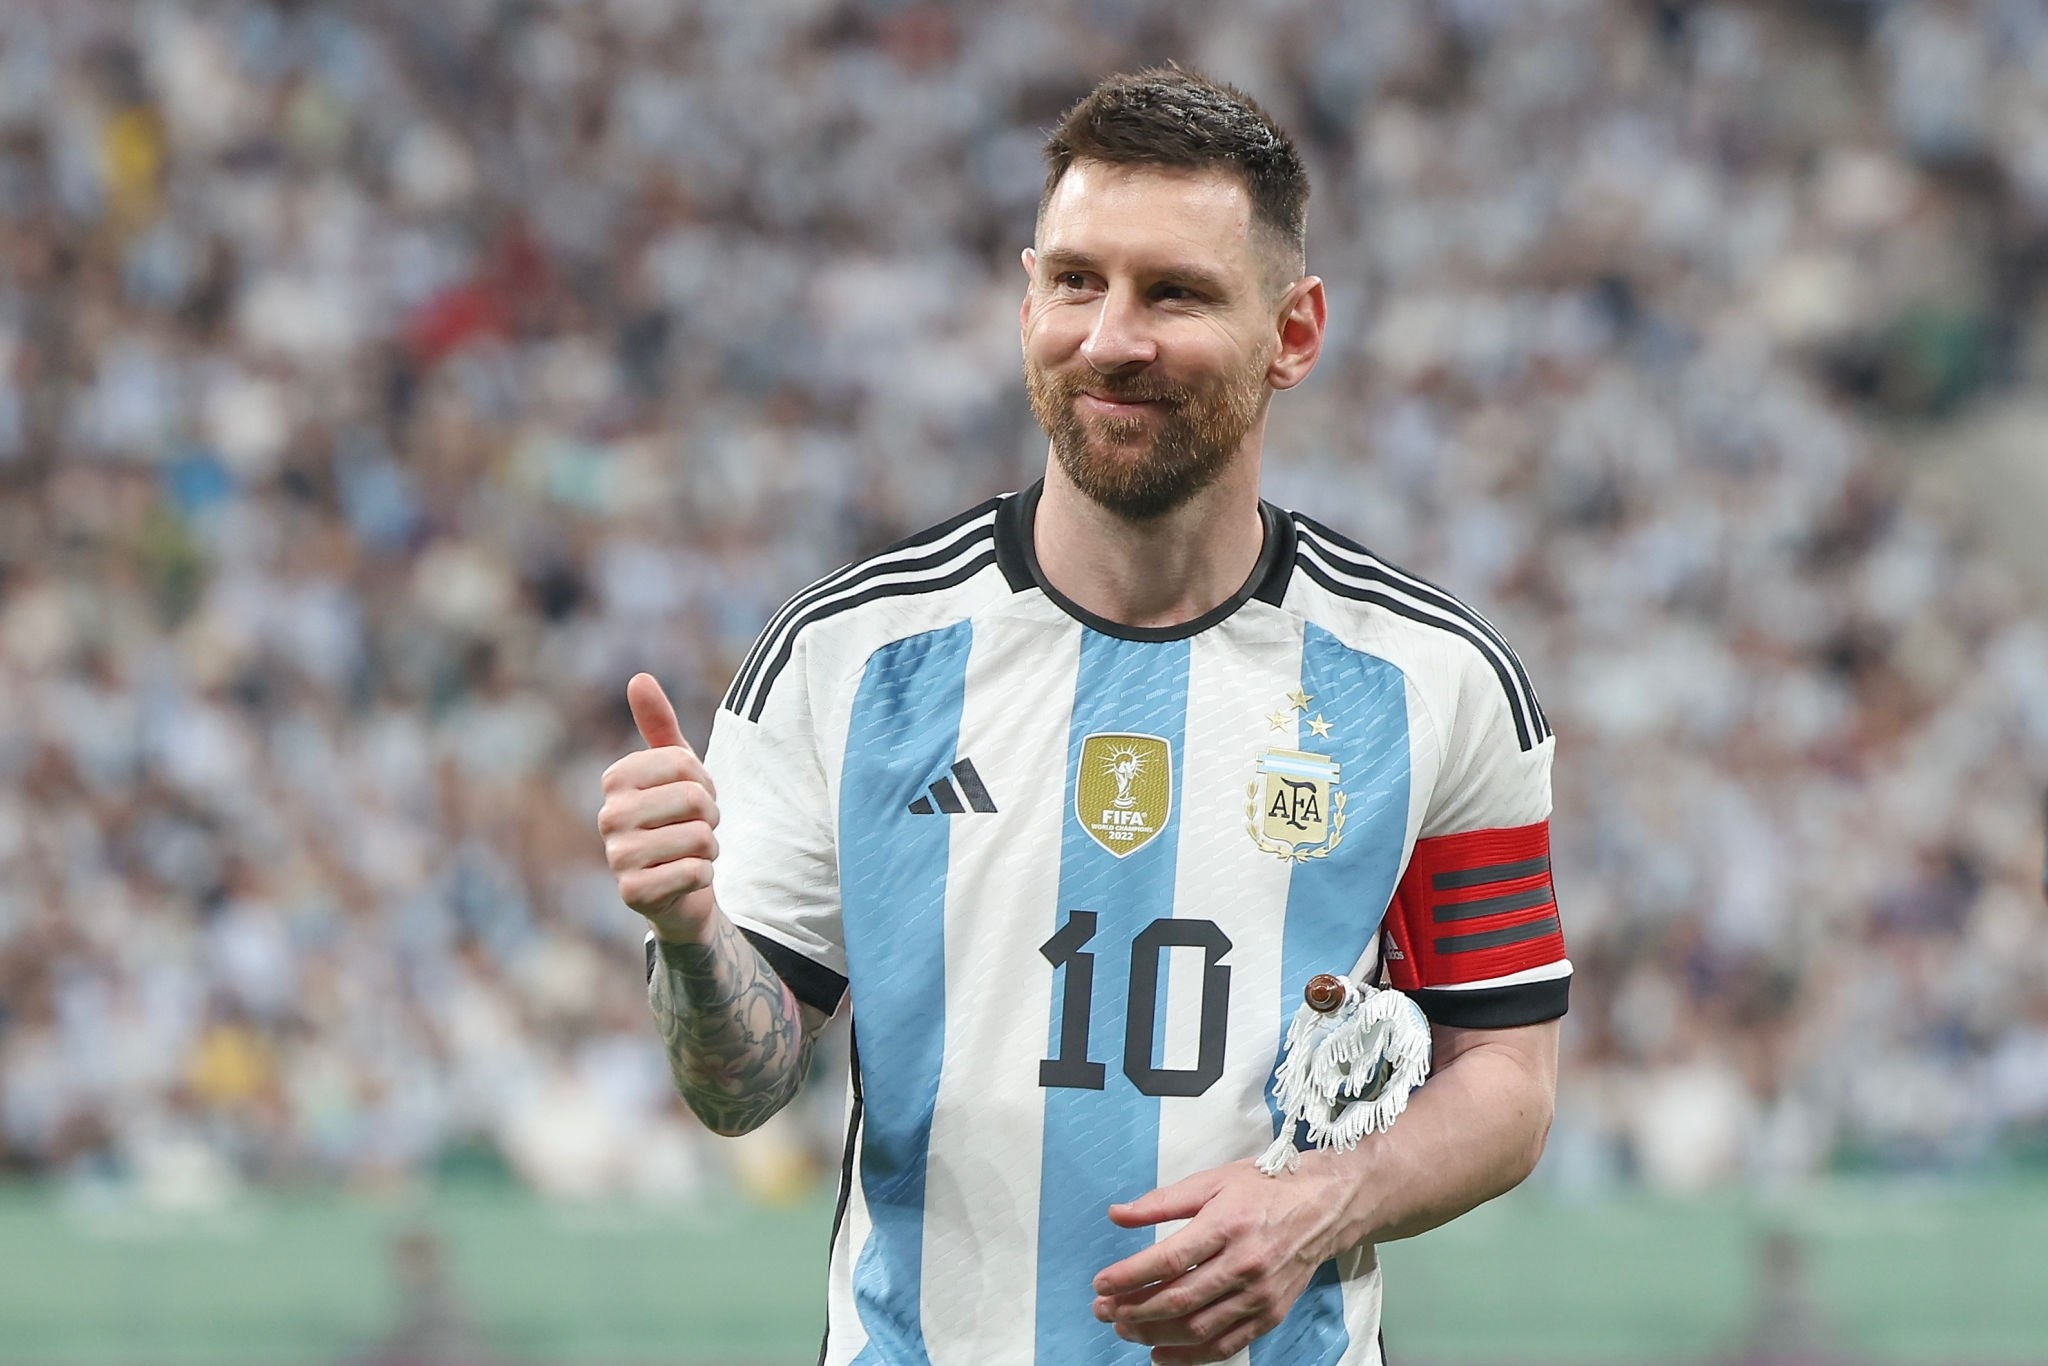 Inter Miami and Lionel Messi fan travels to see Argentina star Leo Messi play his debut match against MLS team Philadelphia Union on Saturday